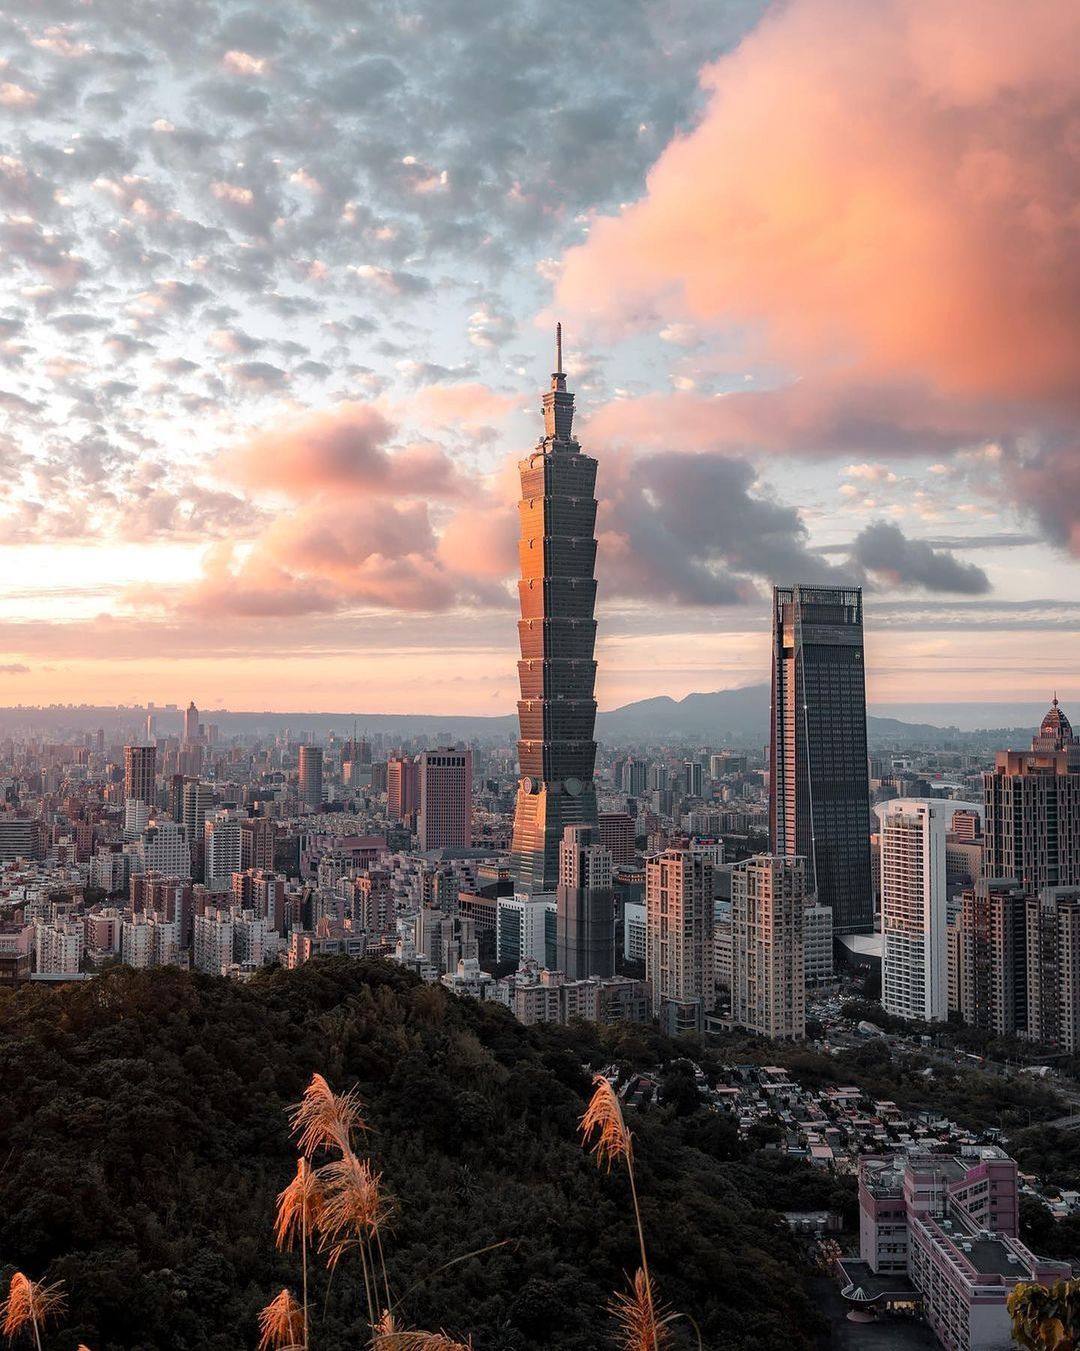 Planning a trip to Taiwan but hoping to go beyond the tourist traps? Check out these world-class recommendations, from Moonrock’s locally inspired cocktails to CMP Village’s gorgeous glamping tents. Photo: @taipeitravels/Instagram